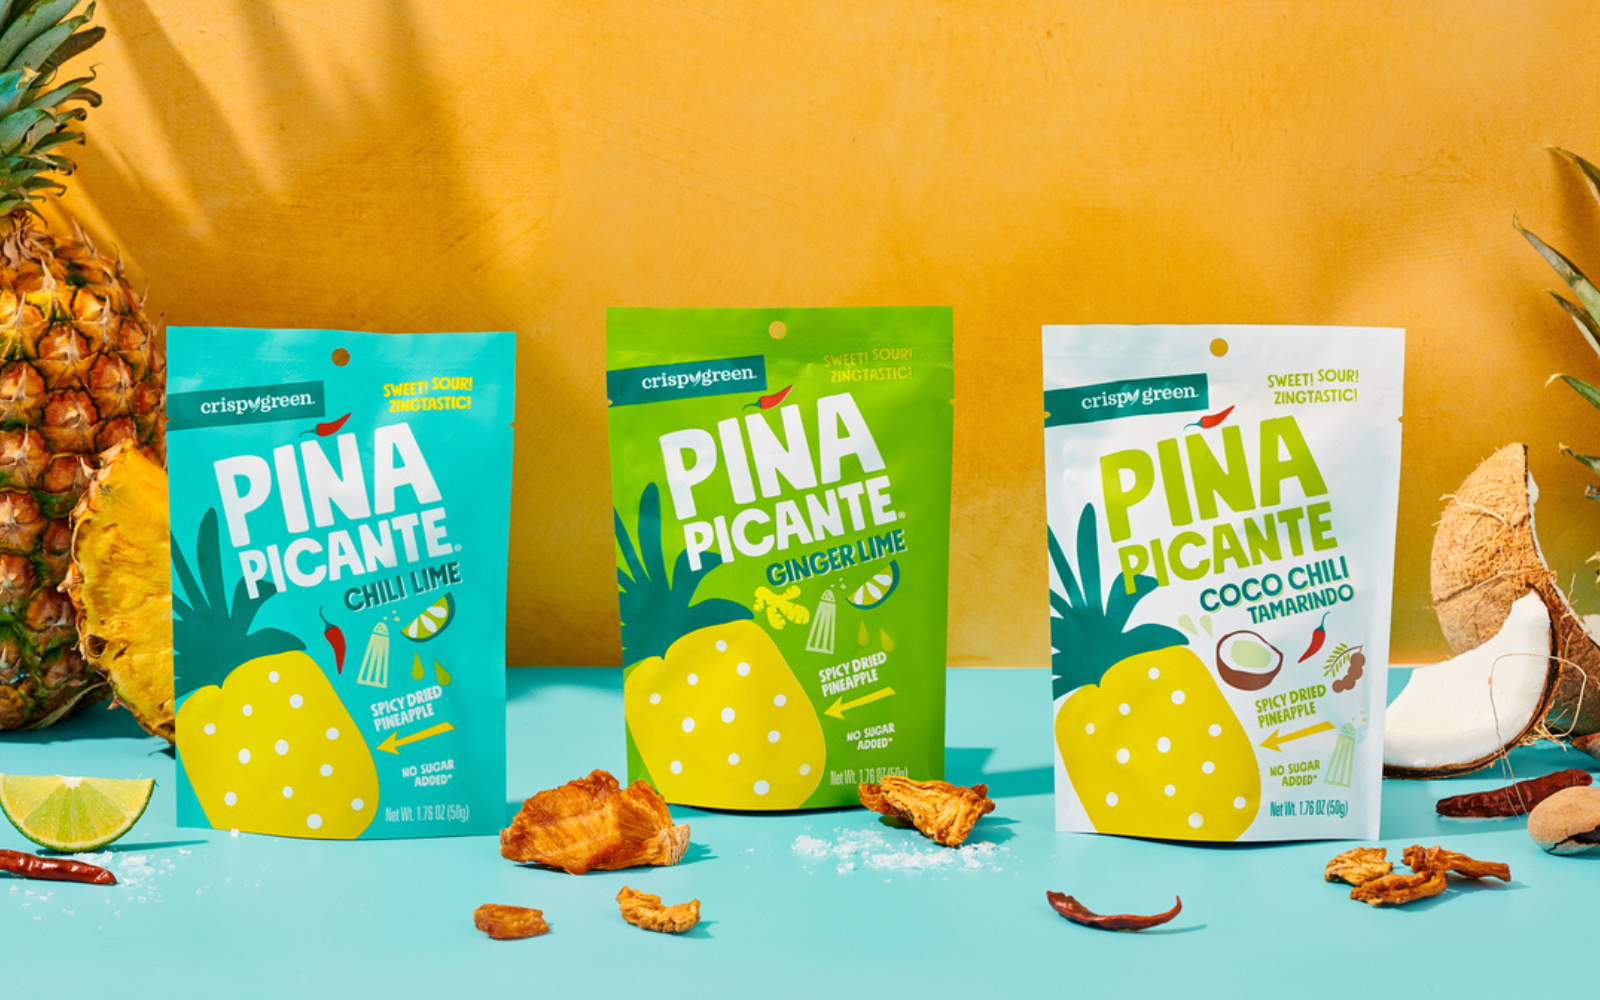 Score a Touchdown During the Super Bowl With Crispy Green's Piña Picante Healthy Pineapple Halftime Snacks